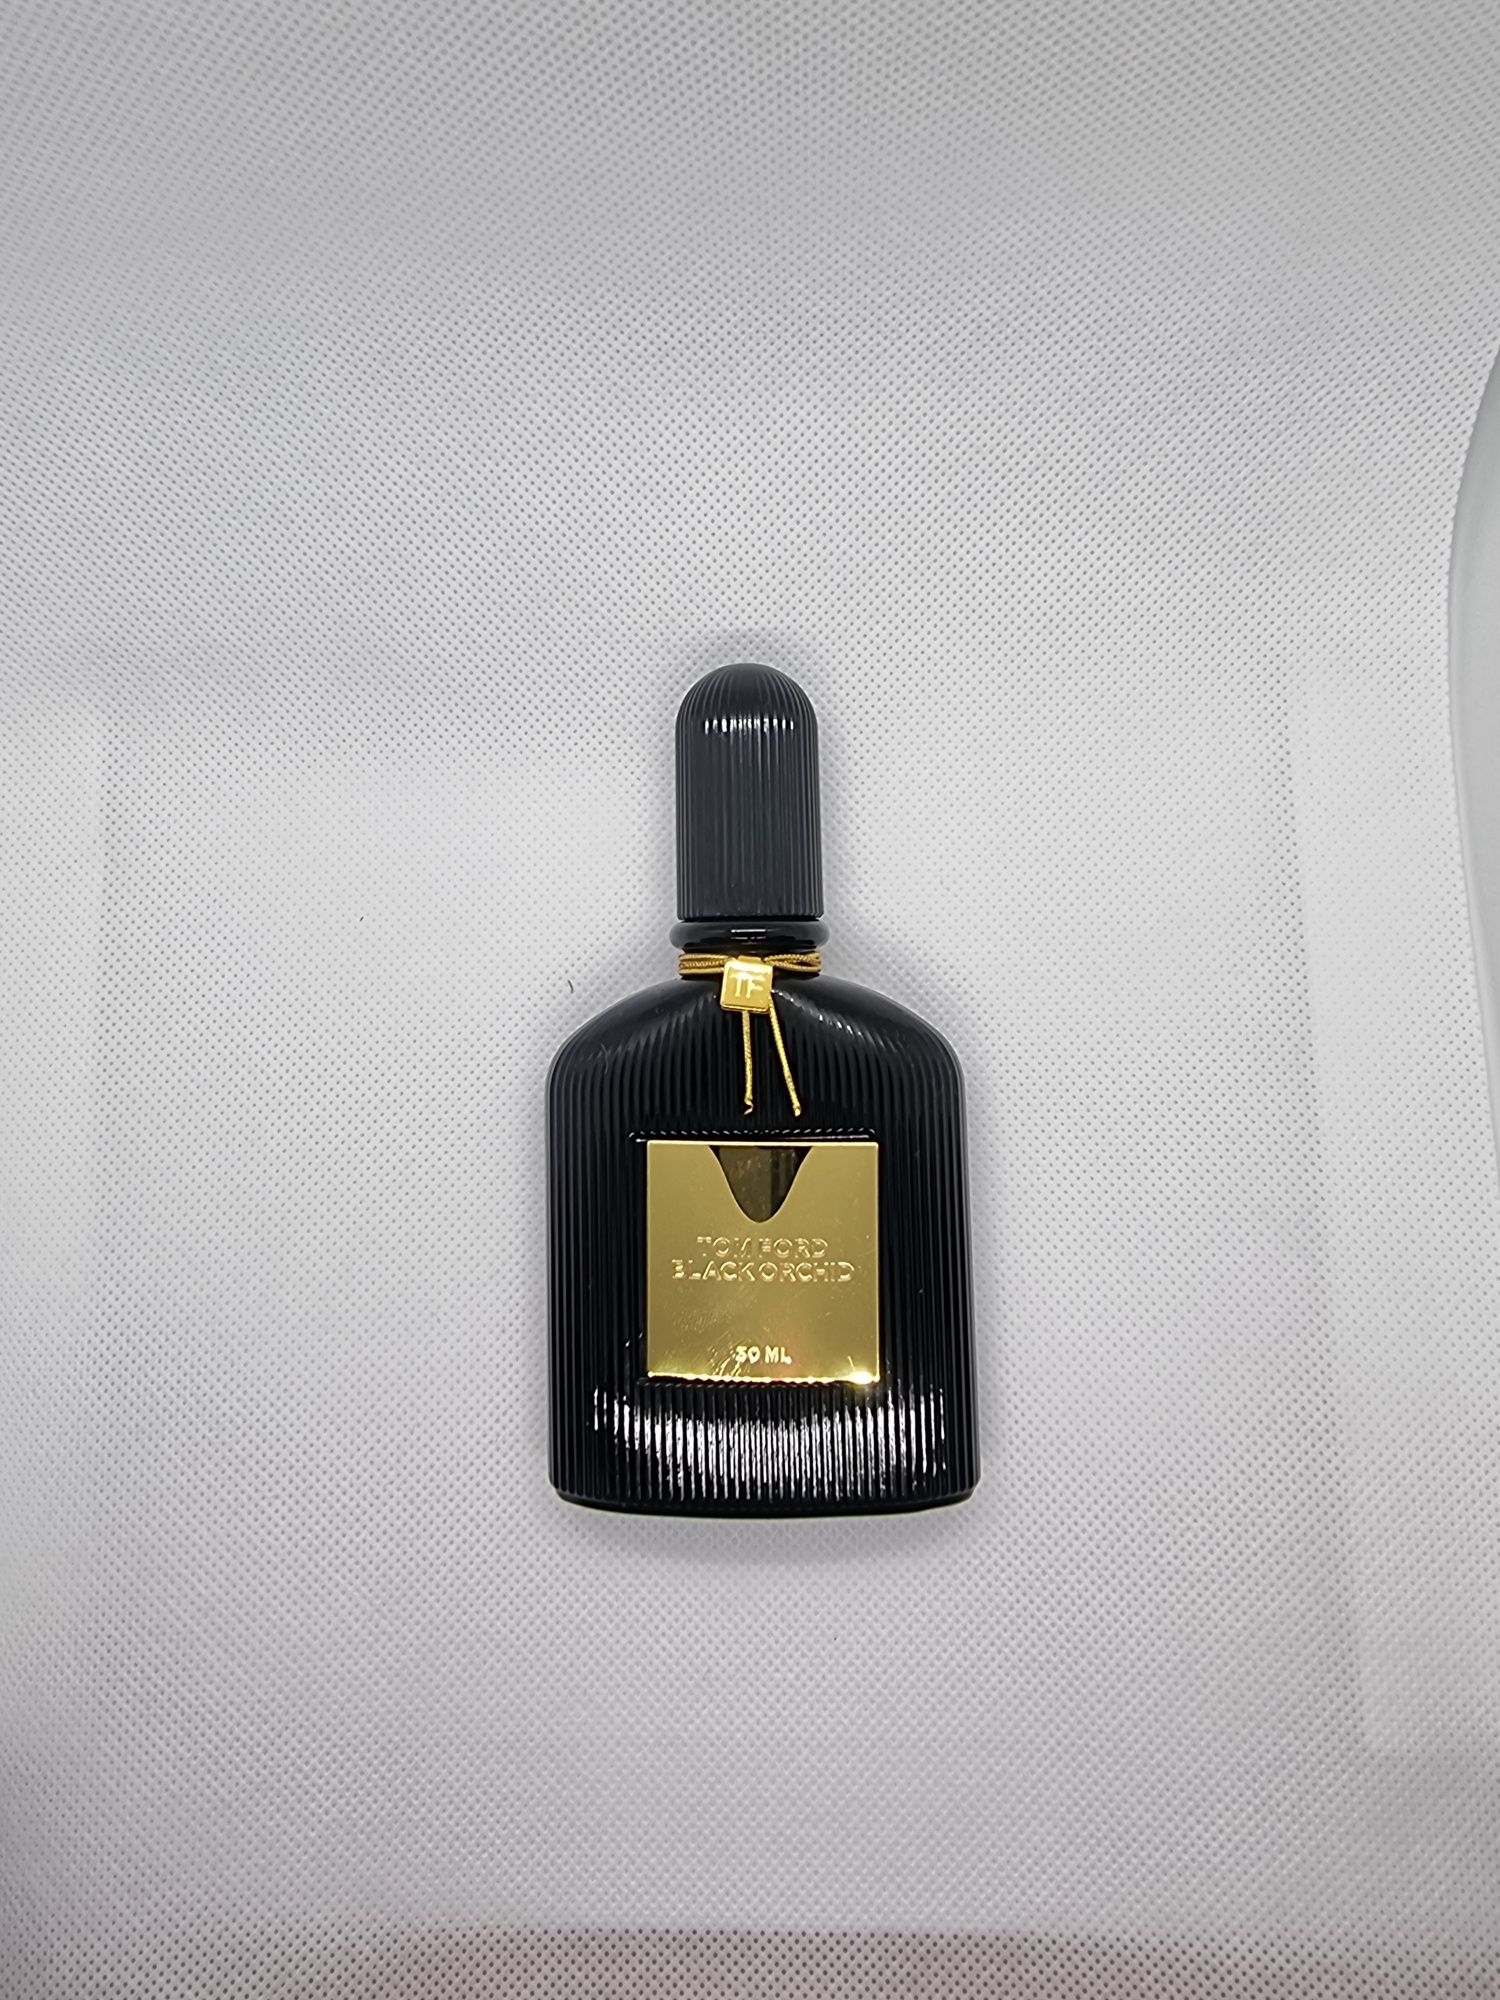 Perume BLACK ORCHID Tom ford